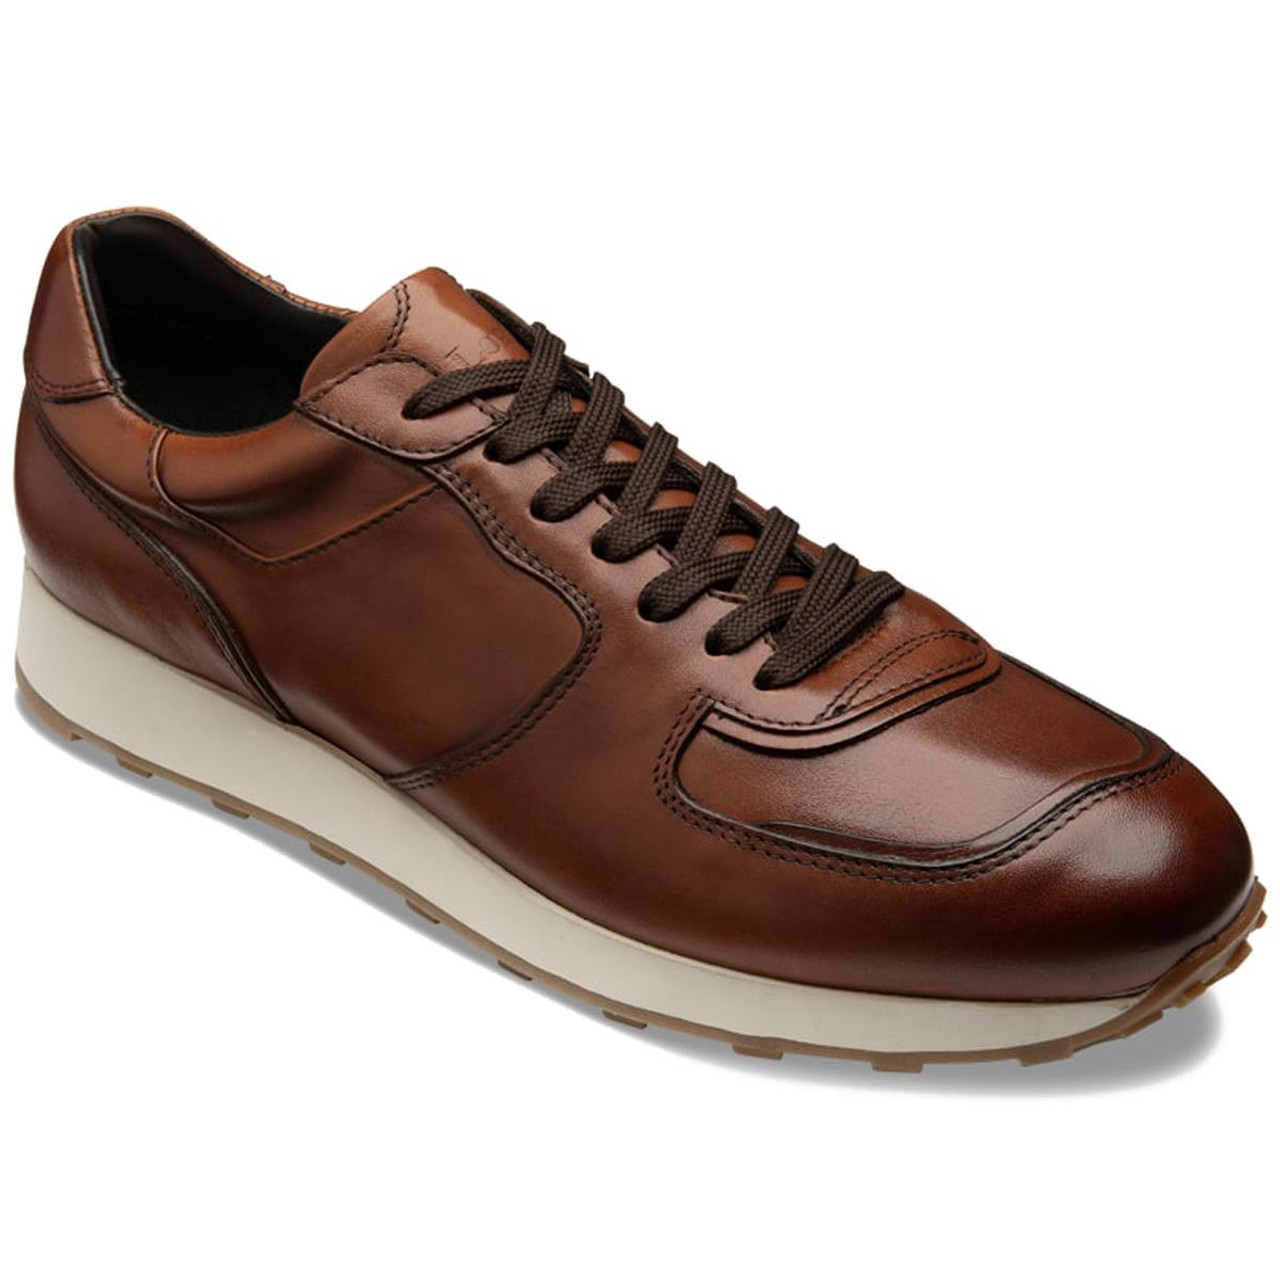 What is the lining of the Loake trainers?